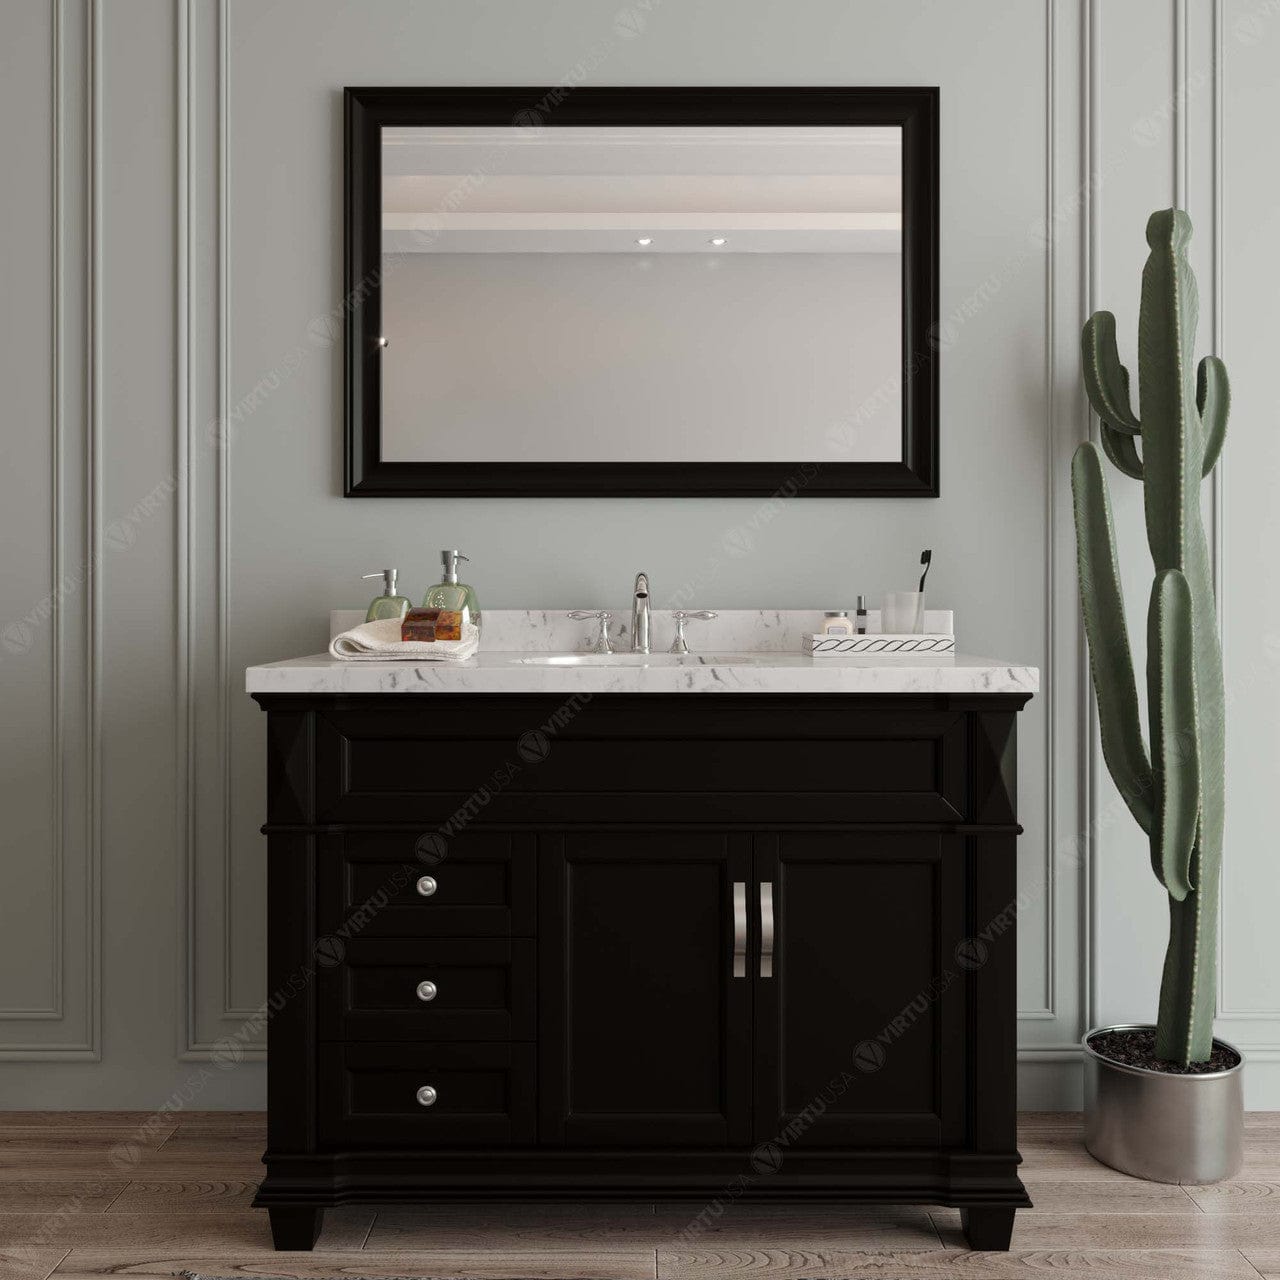 Victoria 48" Bath Vanity in Espresso with Cultured Marble Quartz Top by Virtu USA front view